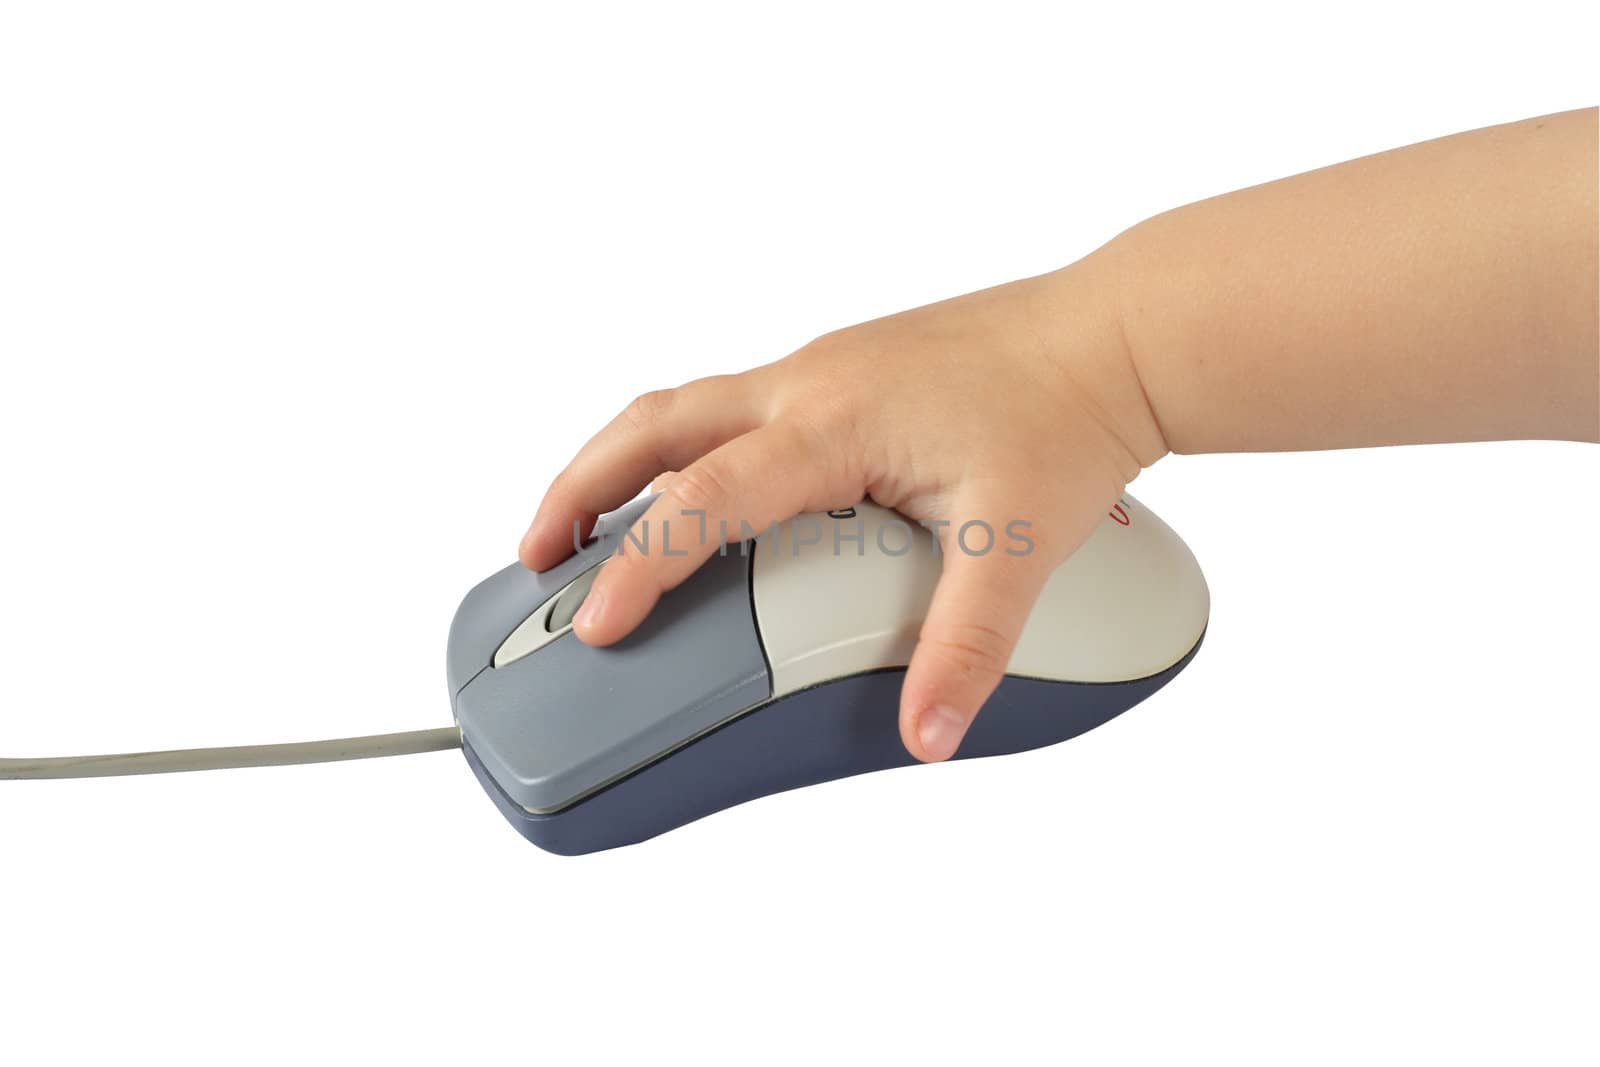 computer mouse and hand isolated on white background